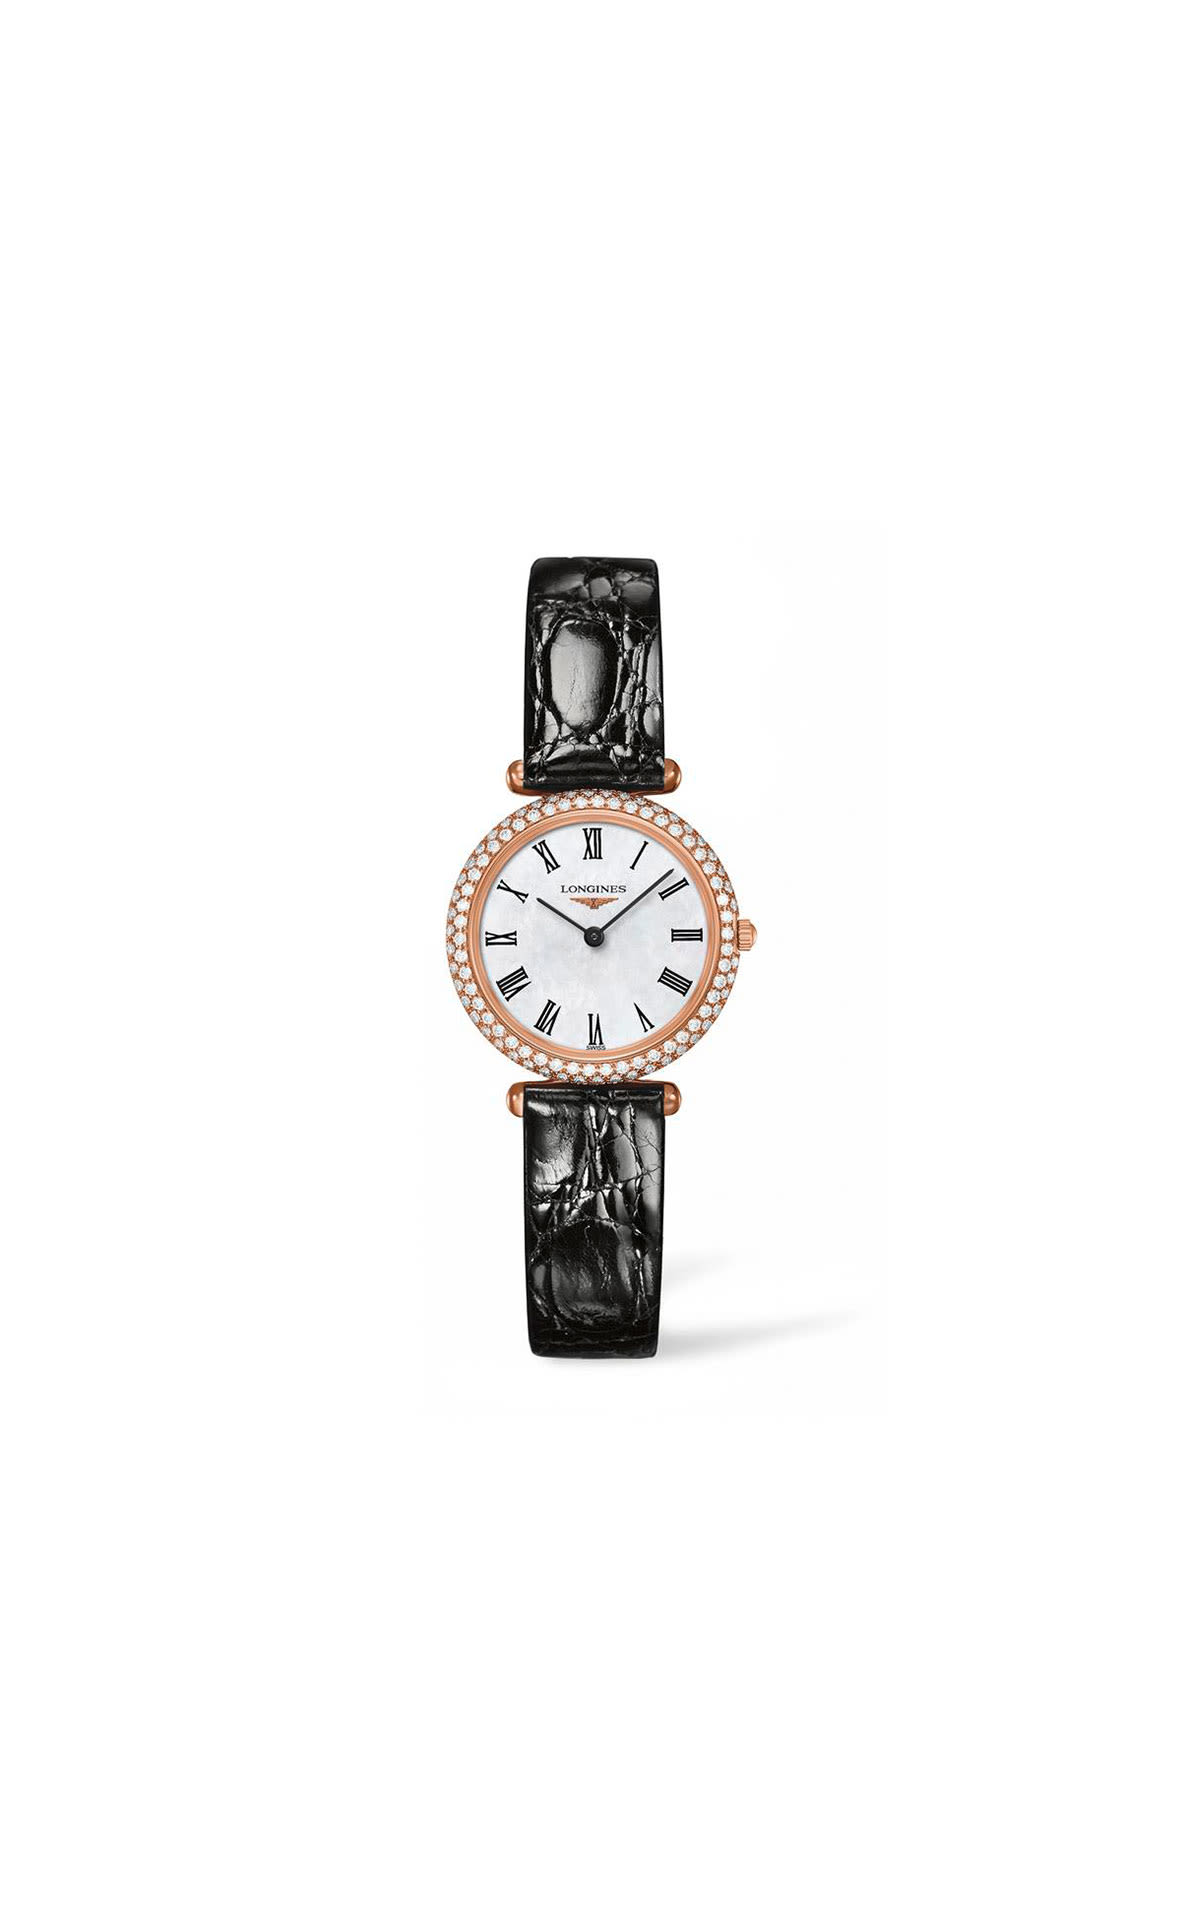 Hour Passion Longines agassiz ladies from Bicester Village